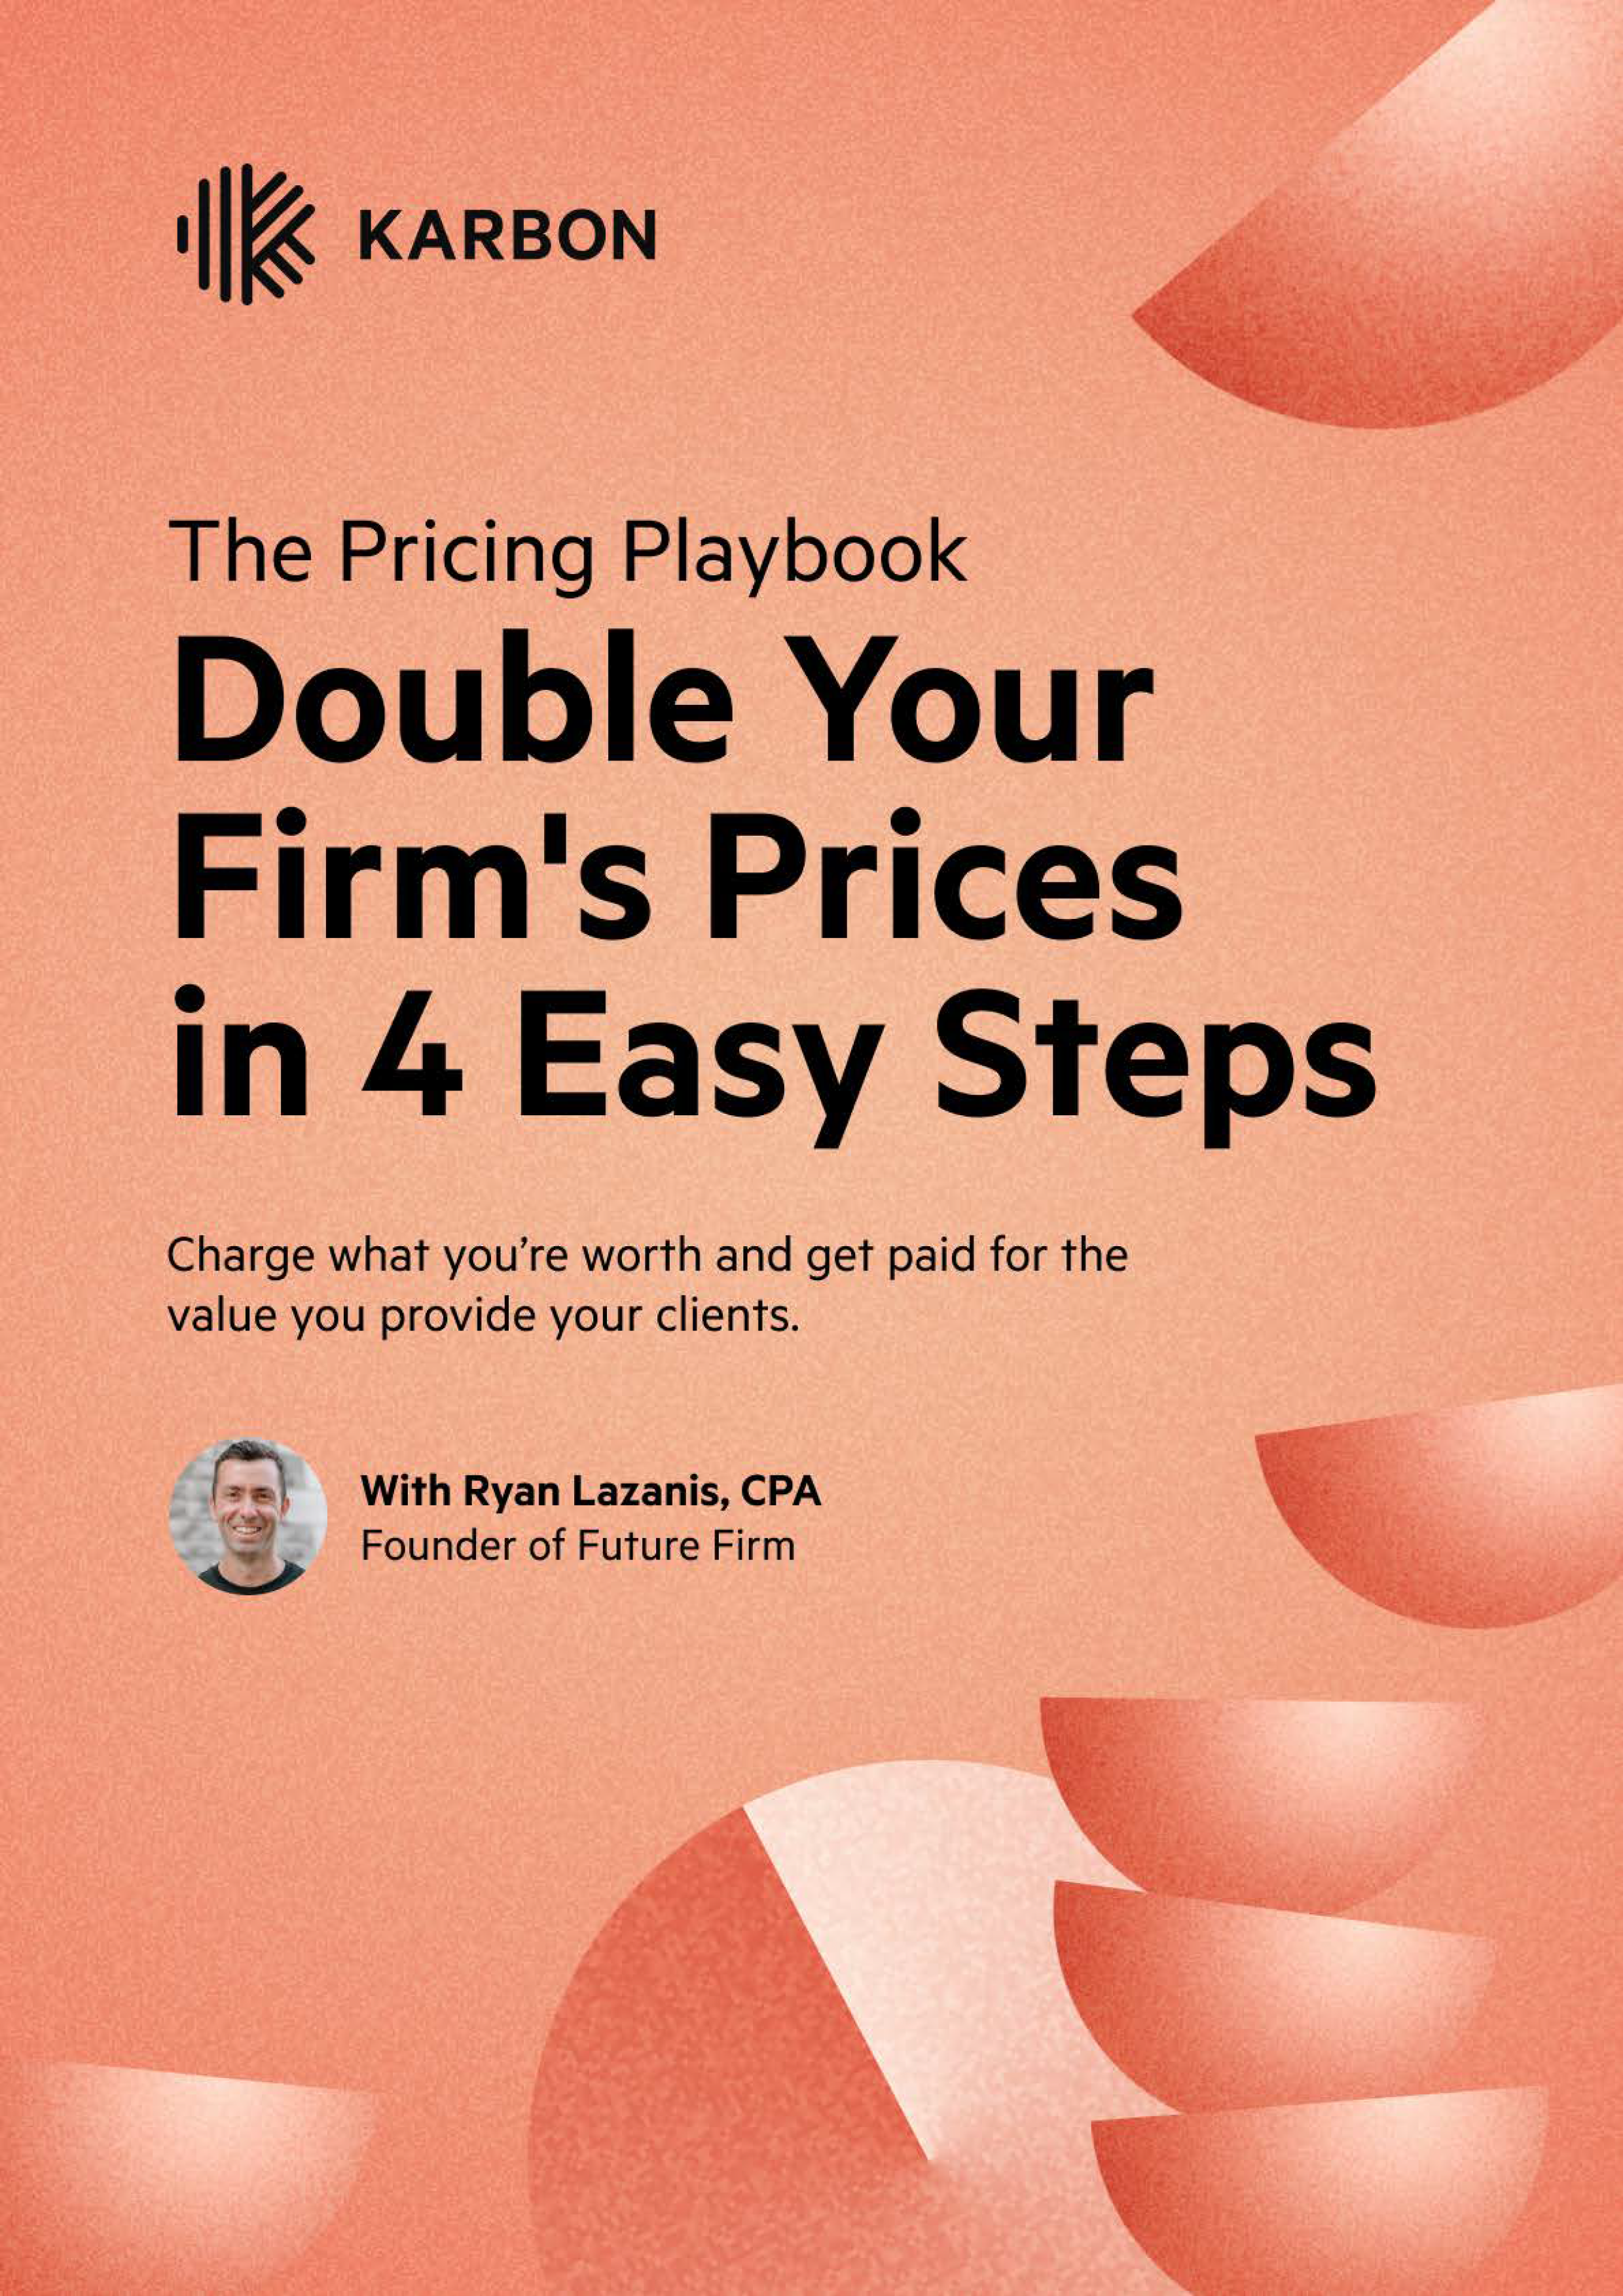 The Pricing Playbook: Double Your Firm's Prices in 4 Easy Steps by Karbon logo